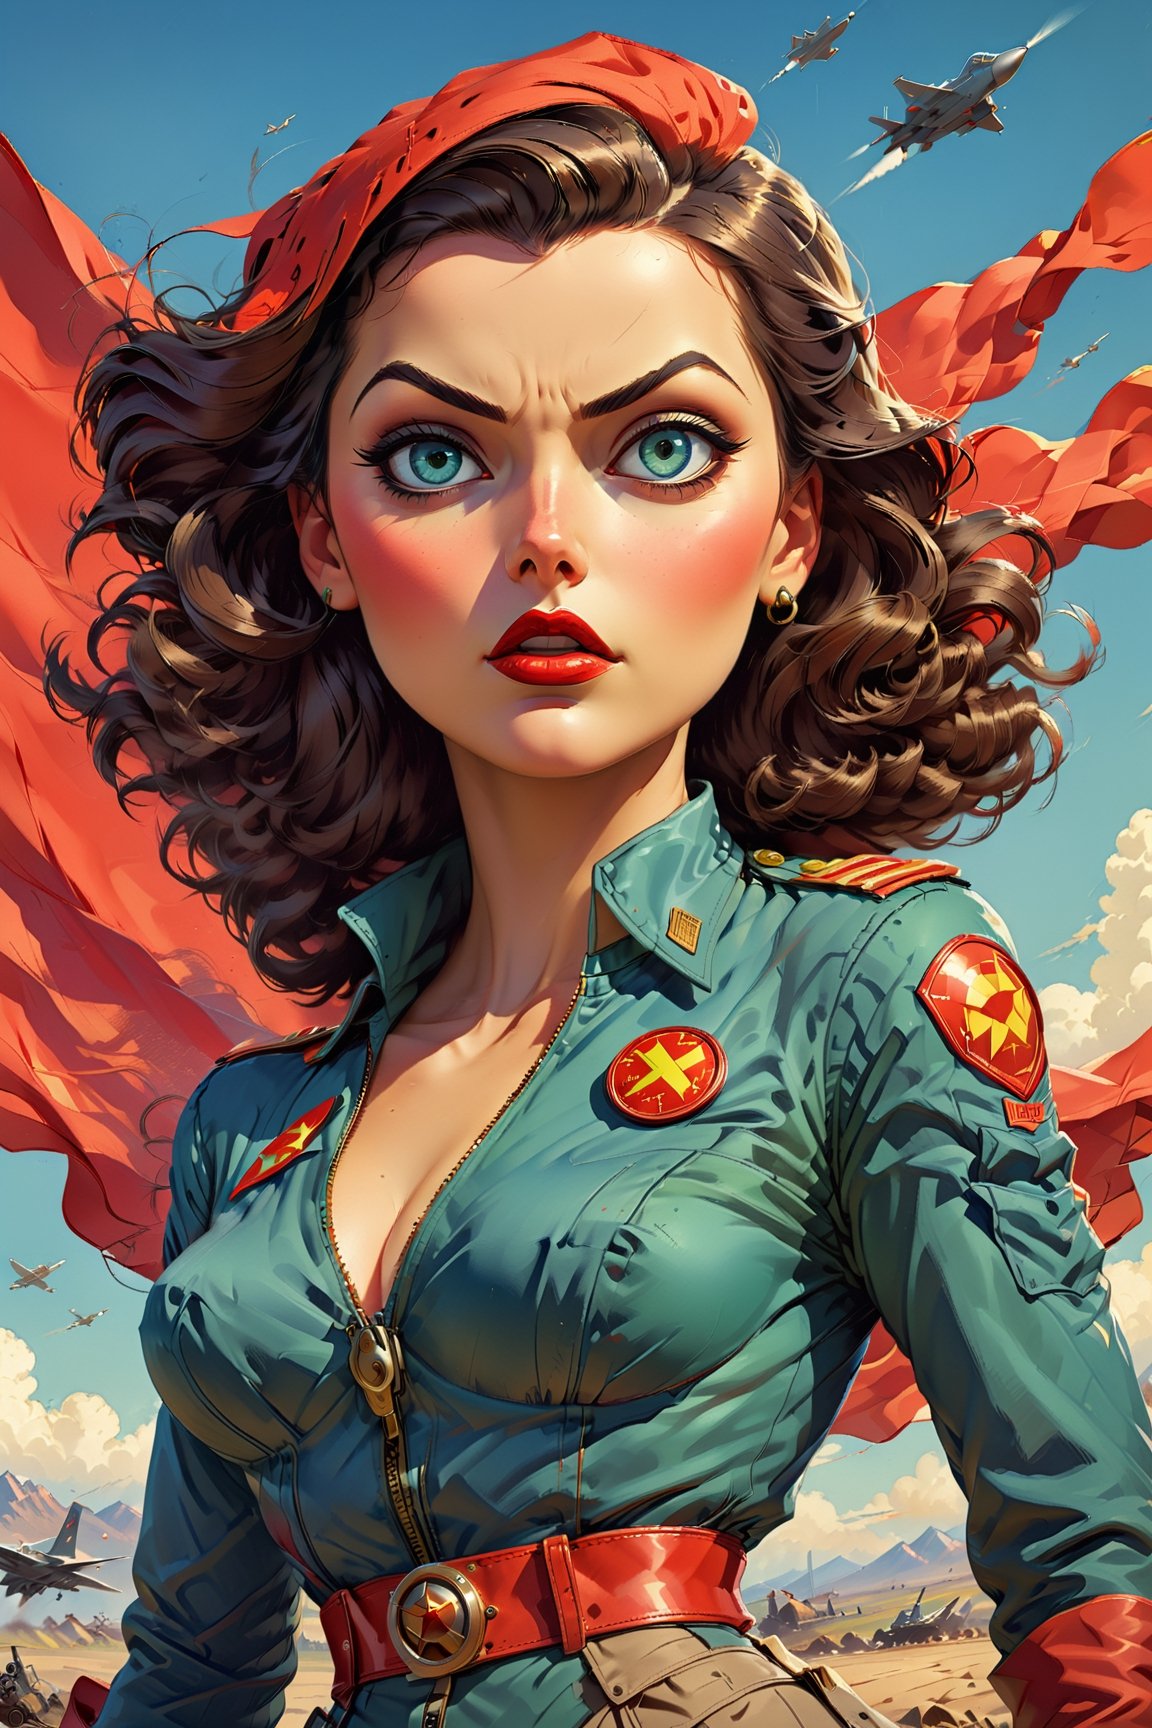 American World War II poster, Gil Elvgren style ((CCCP poster, Soviet poster)) (a medium-sized dark-haired woman with superhero outfit) Poster propaganda, poster, blue sky with fighter jet, hero uniform, 1girl, solo, good body, poster design, poster art style. 1980s, 1950s, 1960s, 1940s, basic color scheme, very colorful poster, colorful art, third rule, inspiring, woman, 1 mature girl, hair blowing in the wind, looking at the viewer, revolutionary, red and blue square background, thick legs, green eyes,Comic Book-Style 2d,2d